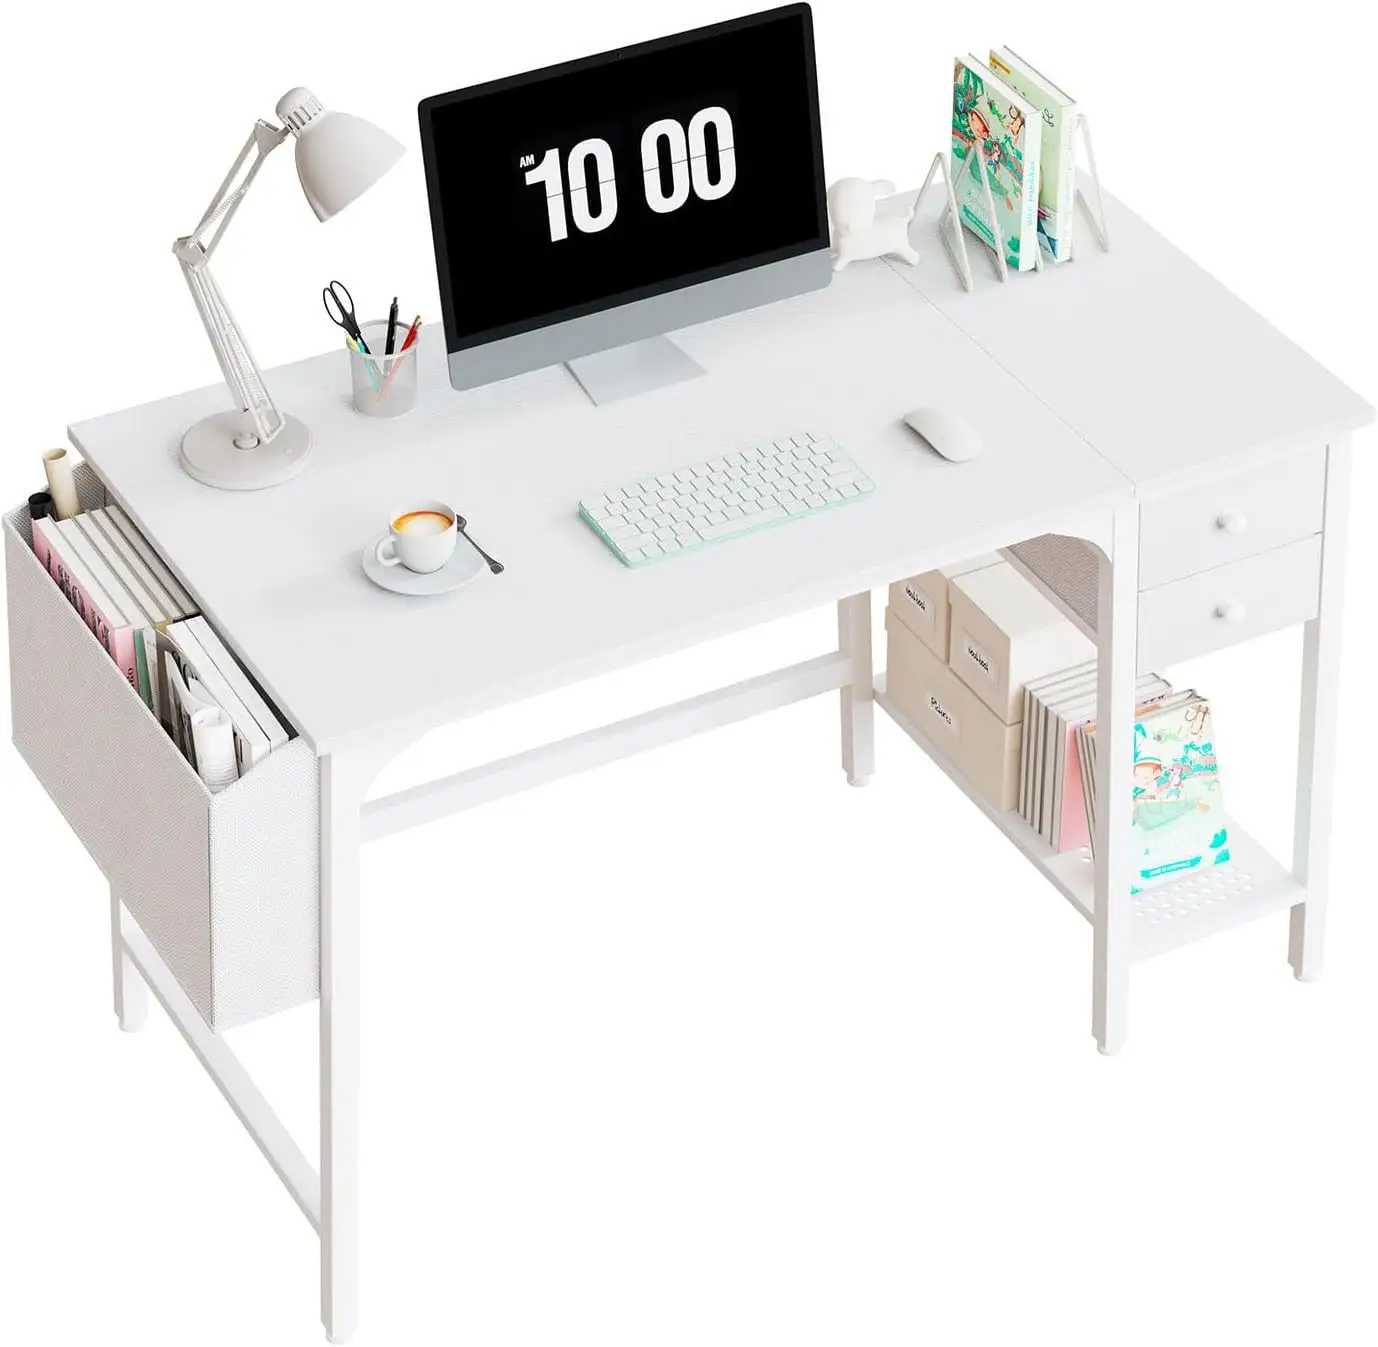 Home Office Furniture Modern Creative Computer Desk Iron and Wood Structure Writing Desk with Drawer Storage Customizable